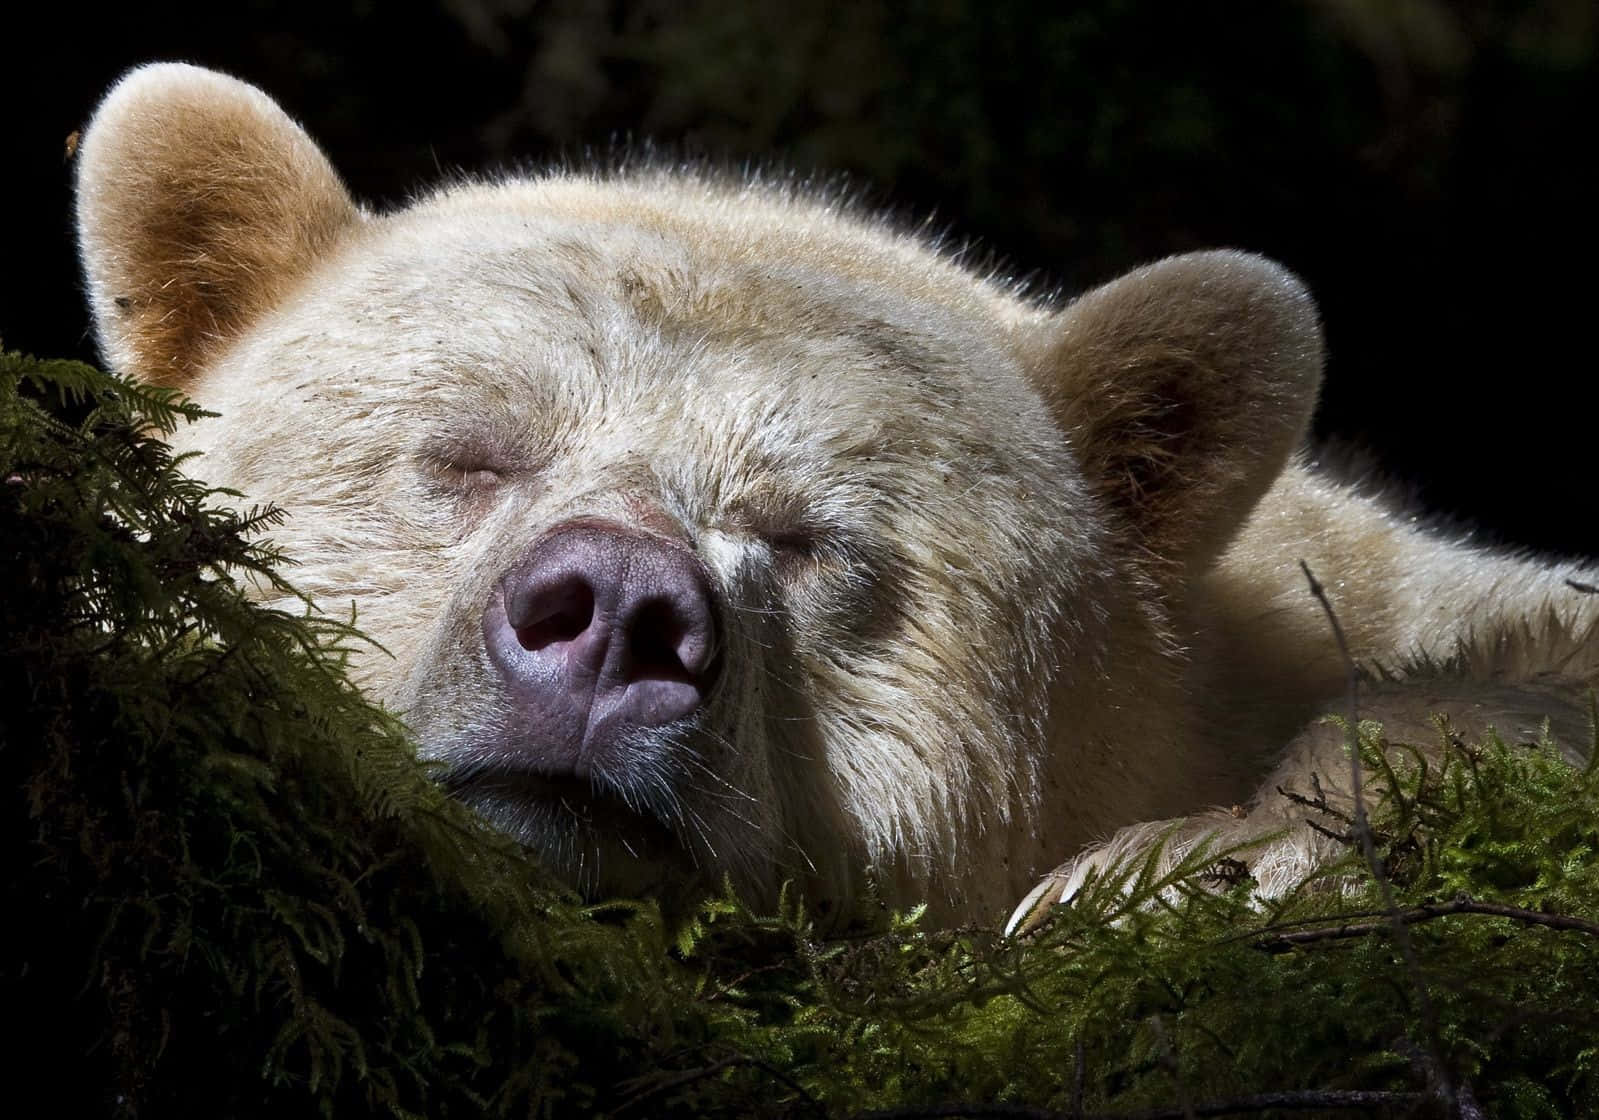 A peaceful bear hibernating in the heart of a tranquil winter forest. Wallpaper